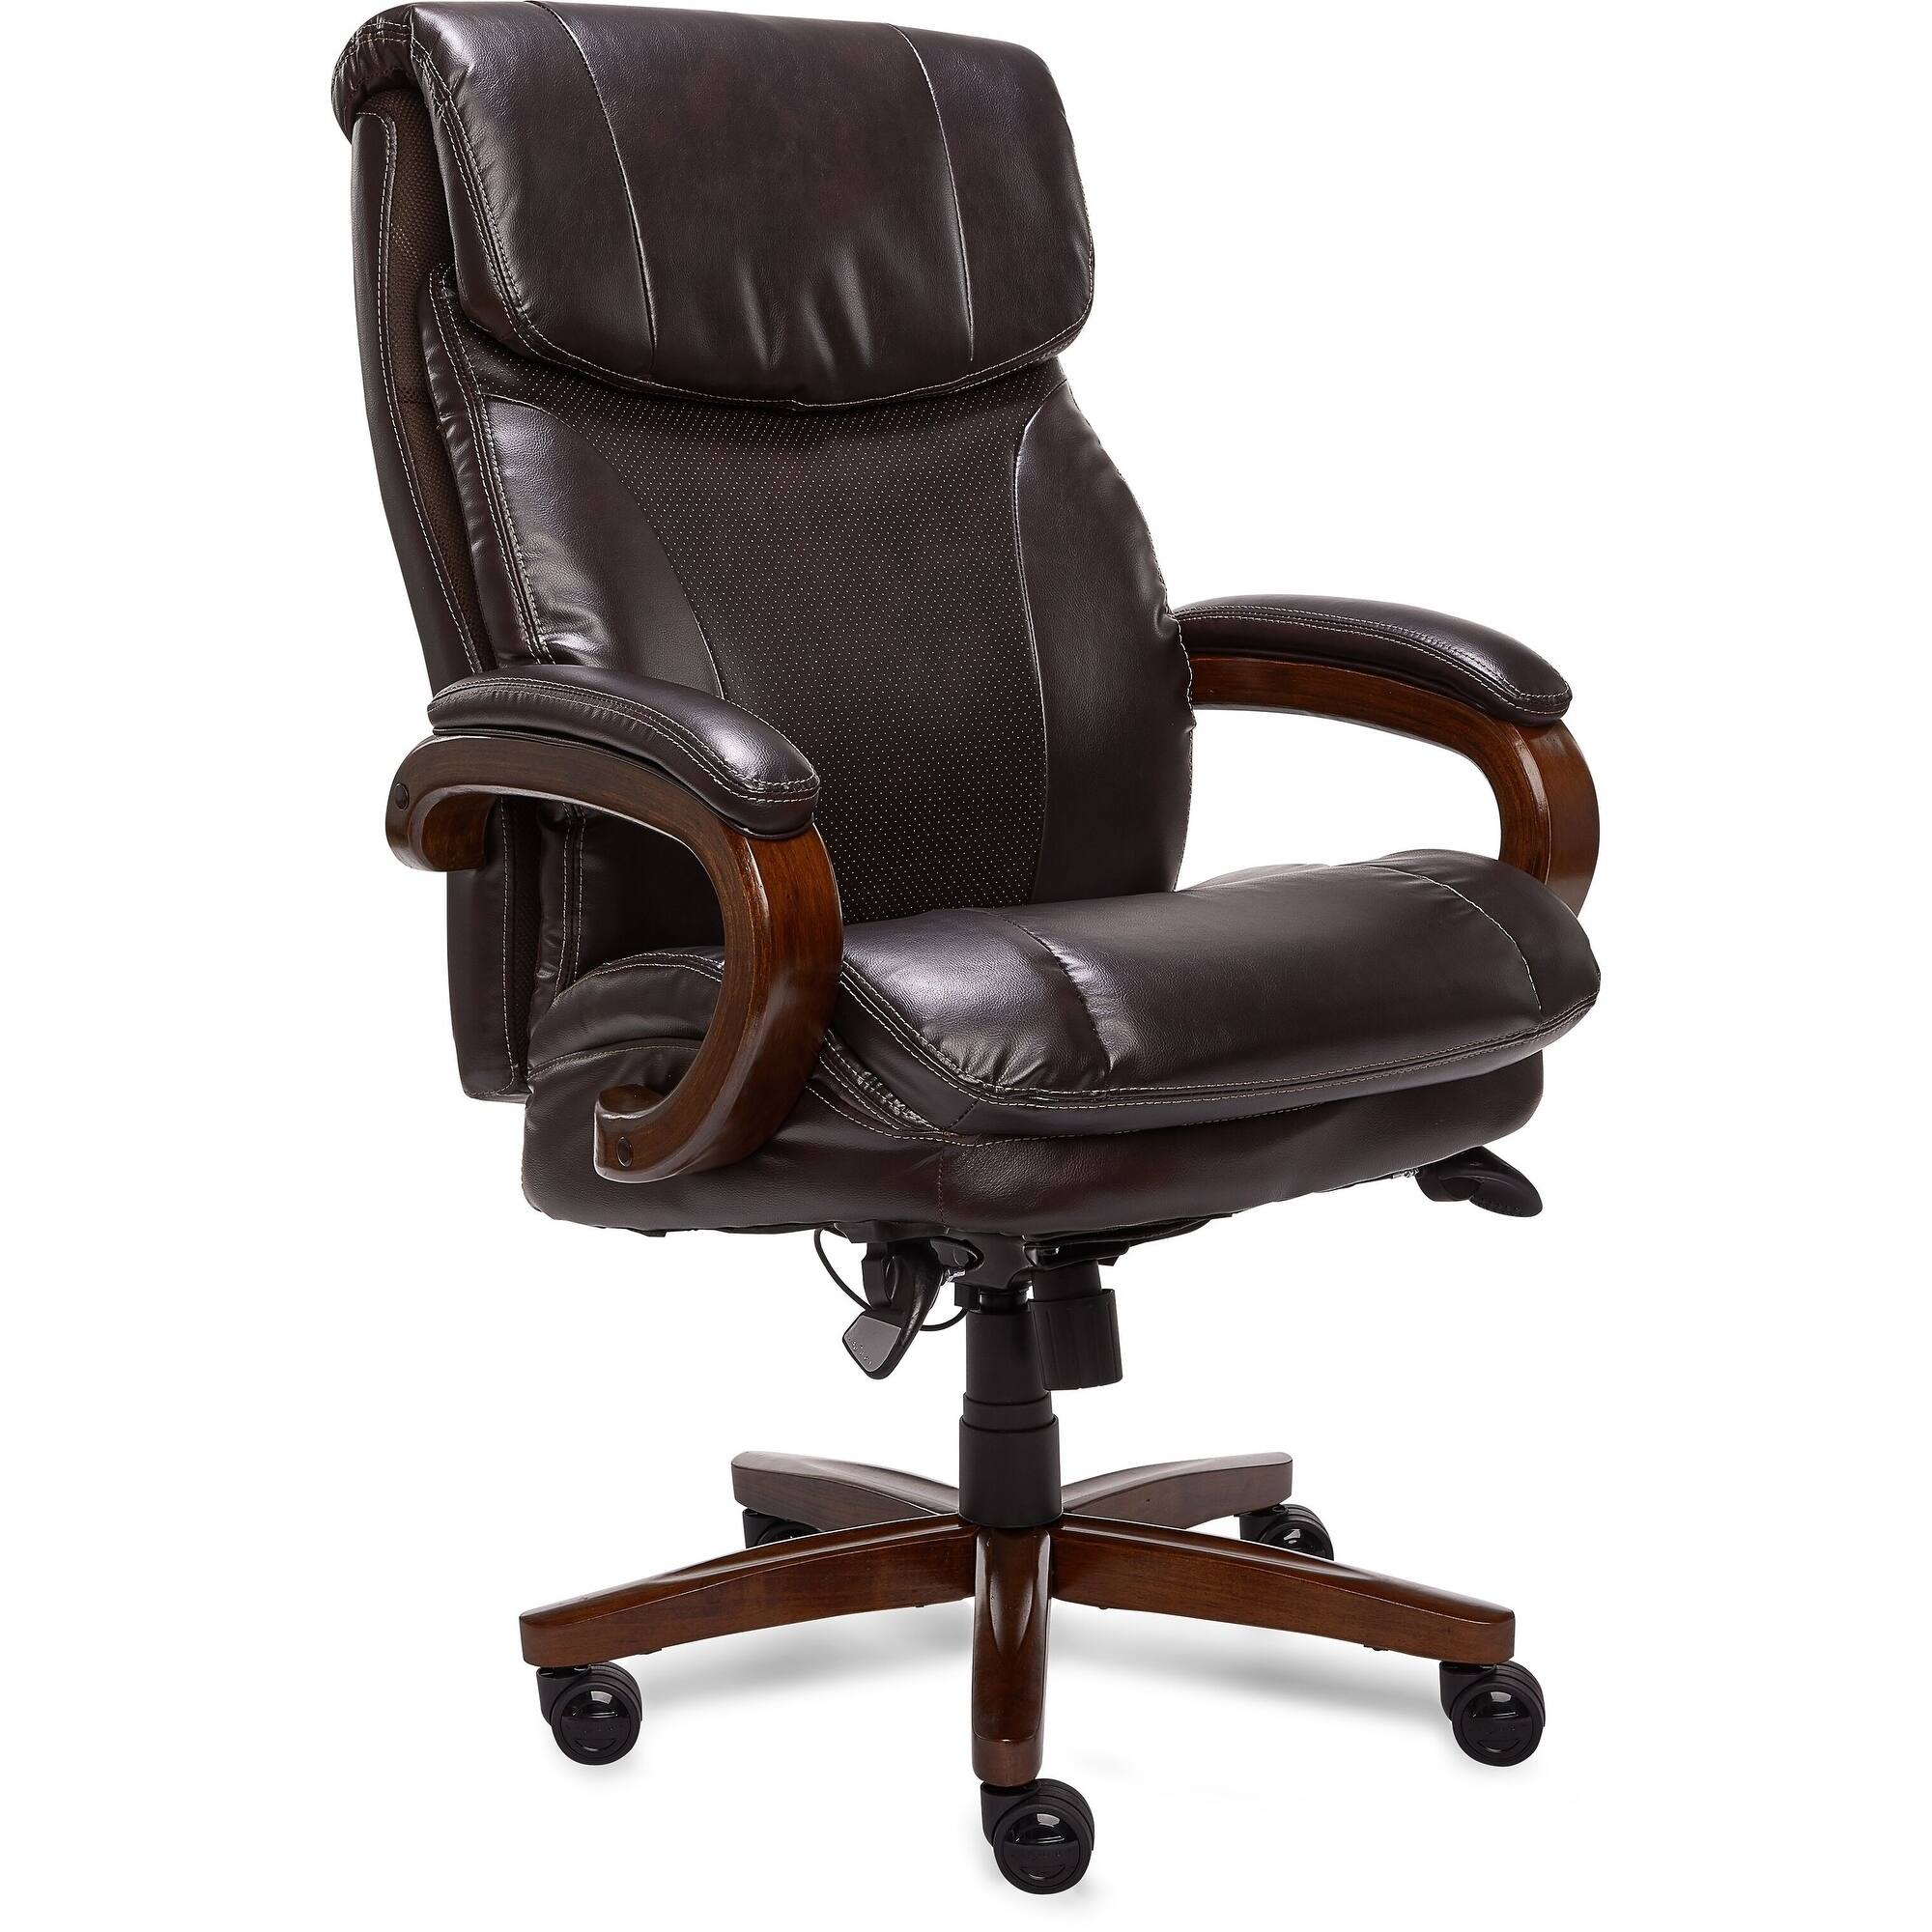 Buy Office & Conference Room Chairs Online at Overstock | Our Best Home